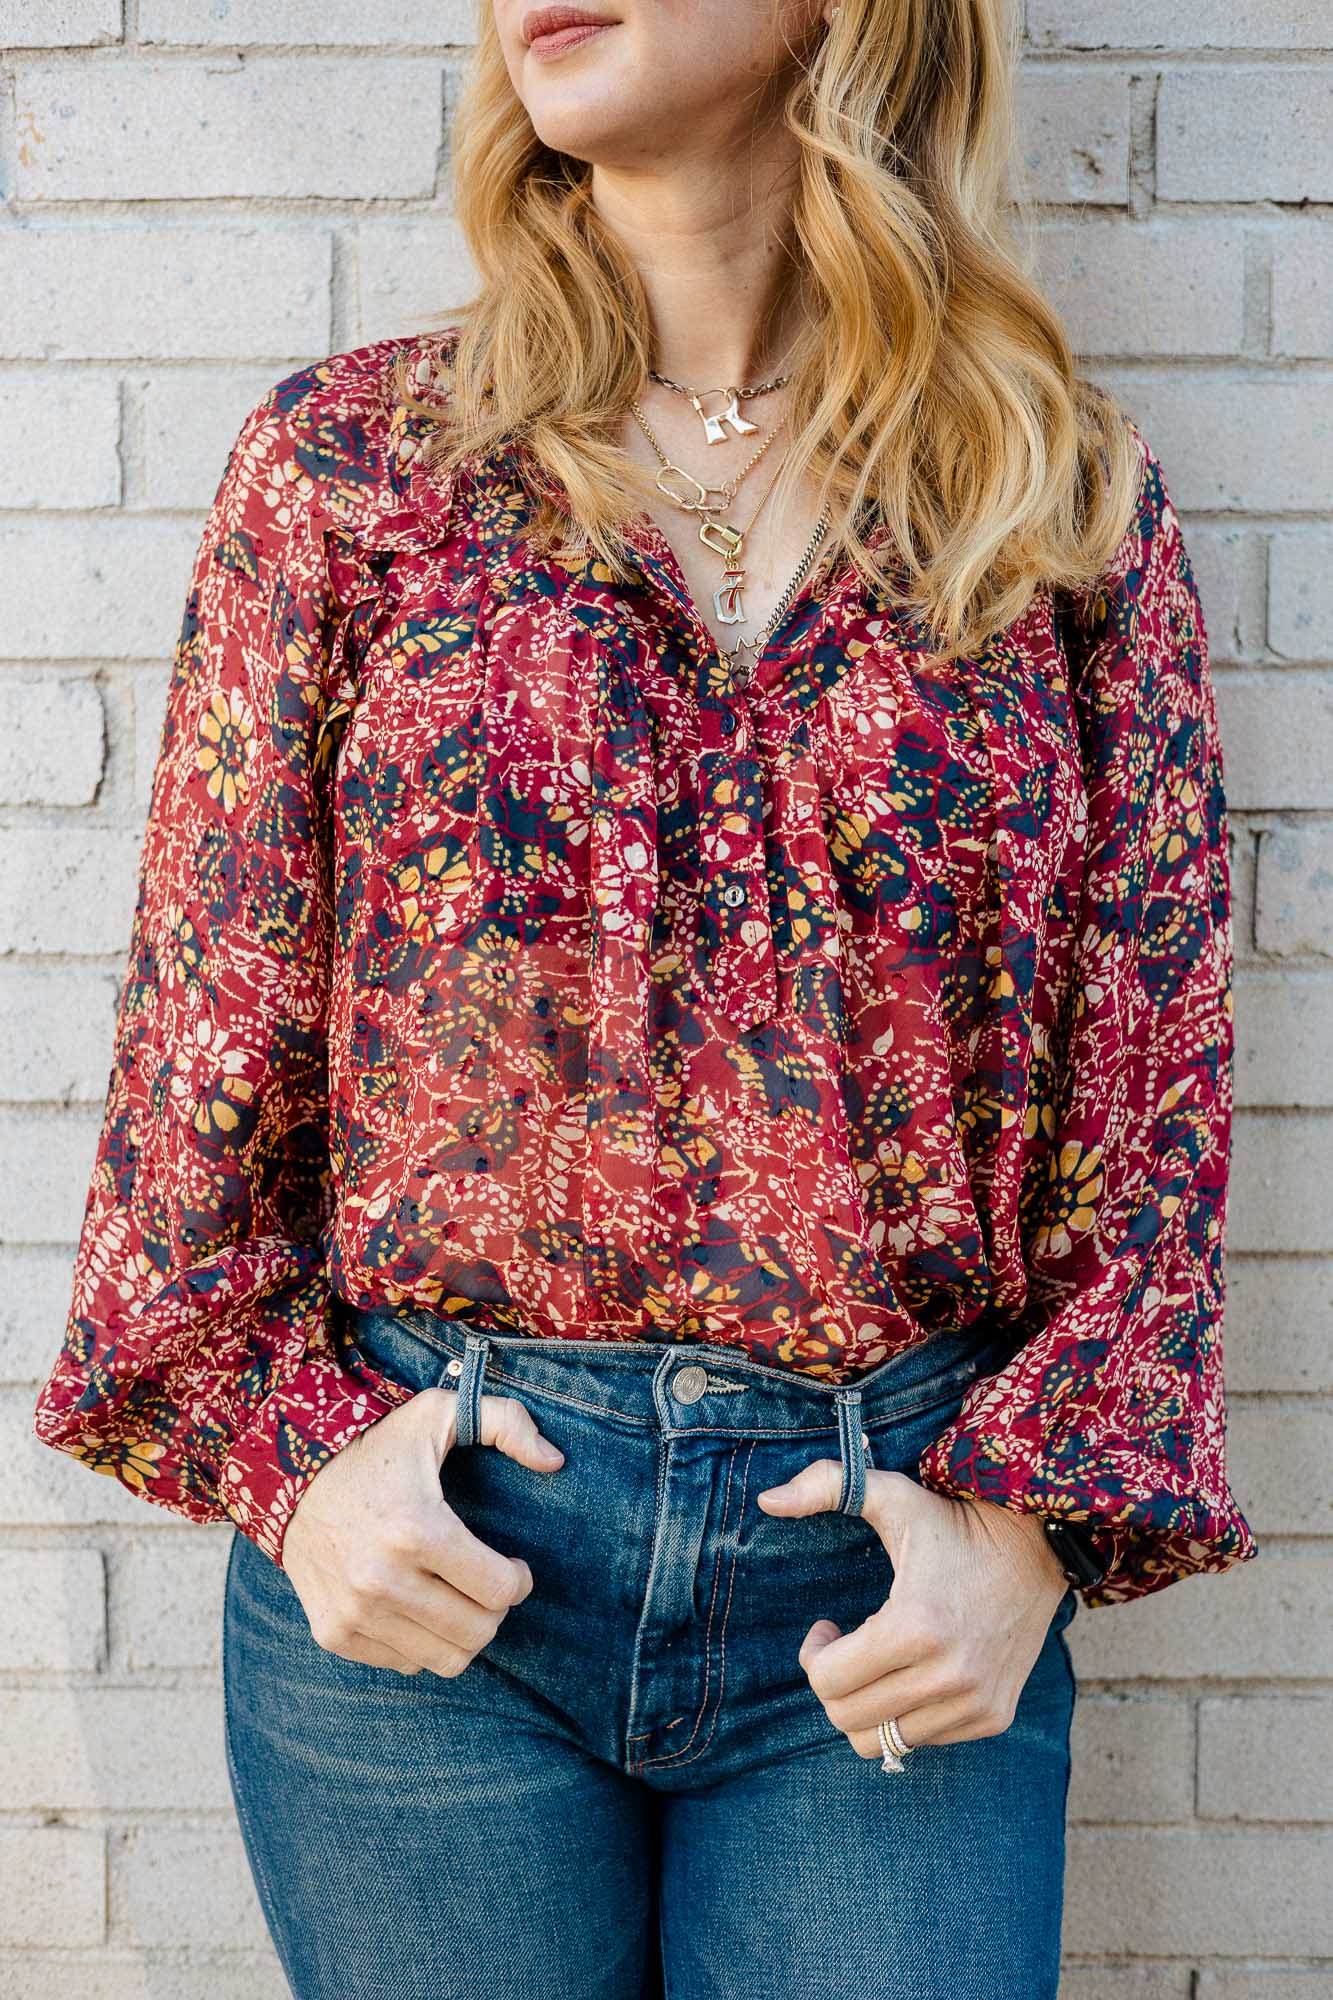 Wearing the ba&sh Gaelle print chiffon blouse in Fall coloors with Mother super cruise jeans.